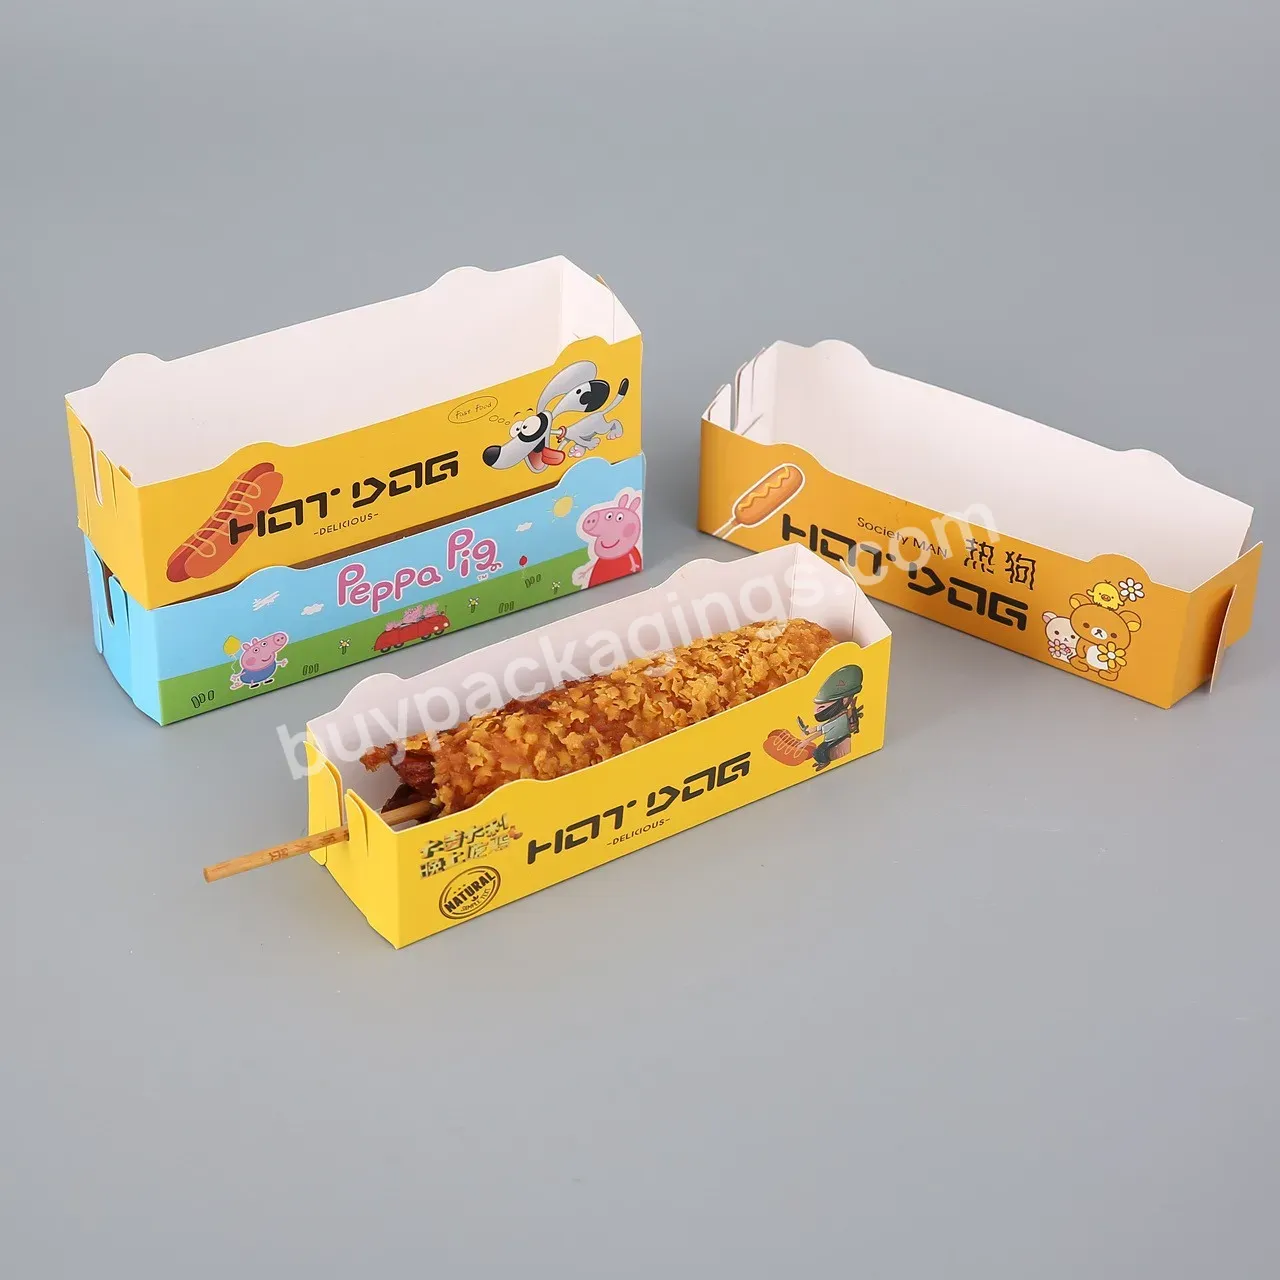 High Quality Customized Disposable Food Packaging Hot Dog Box Takeaway Delivery - Buy Hot Dog Box,Customized Disposable Food Packaging Hot Dog Box,Hot Dog Box Takeaway Delivery.